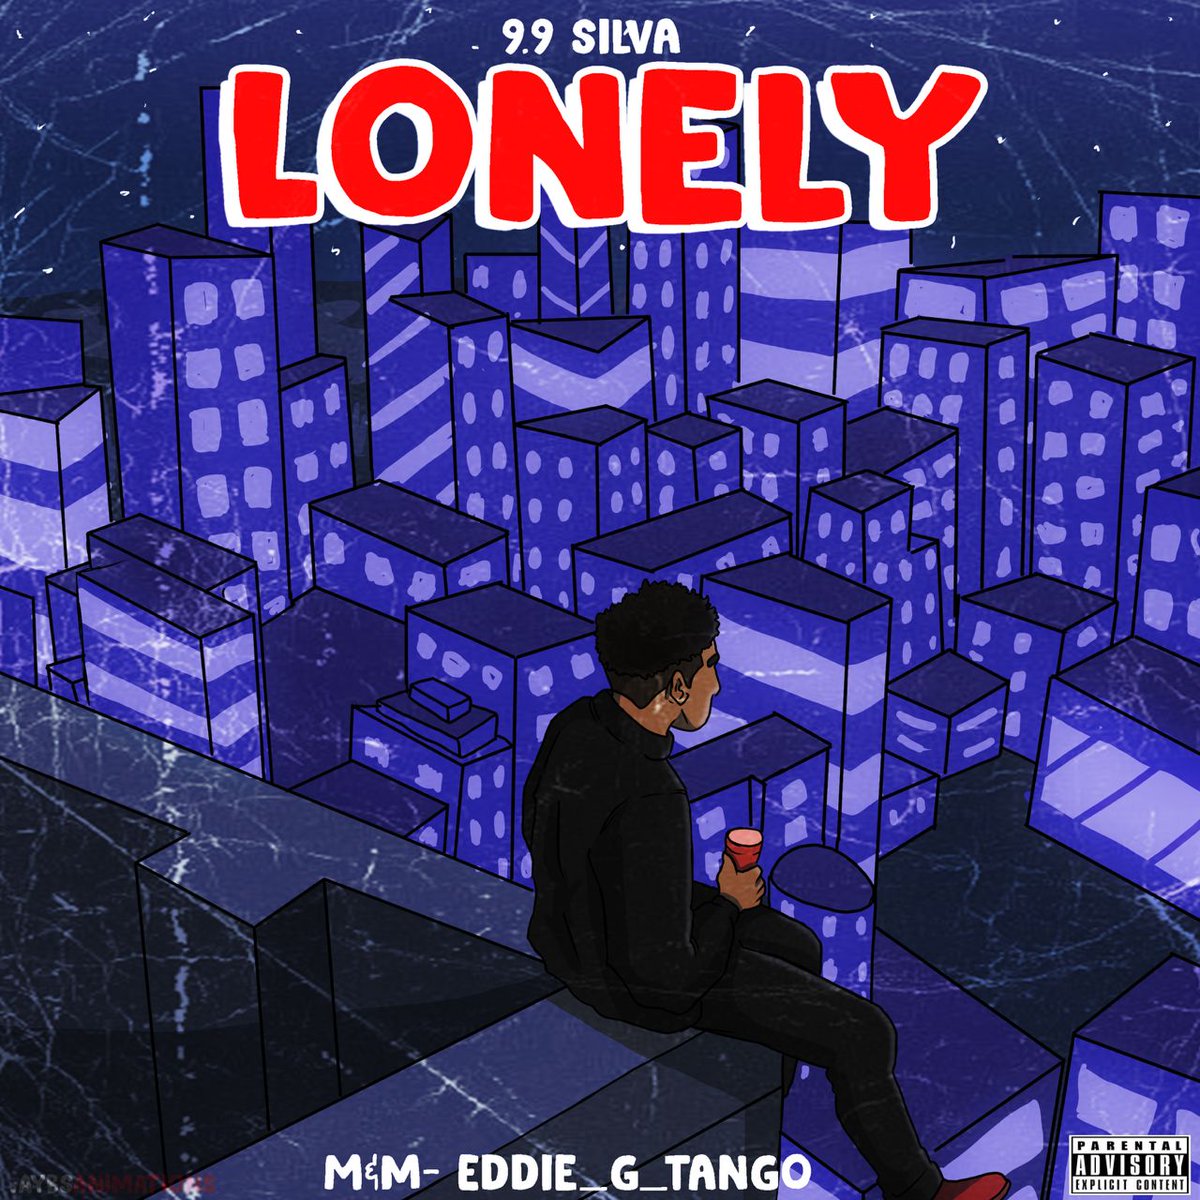 NP 📻🎙️🎧 Lonely by @SilvaLurd

#honor1035fm
#iamrhyno007
#LONELY
#SILVALURD